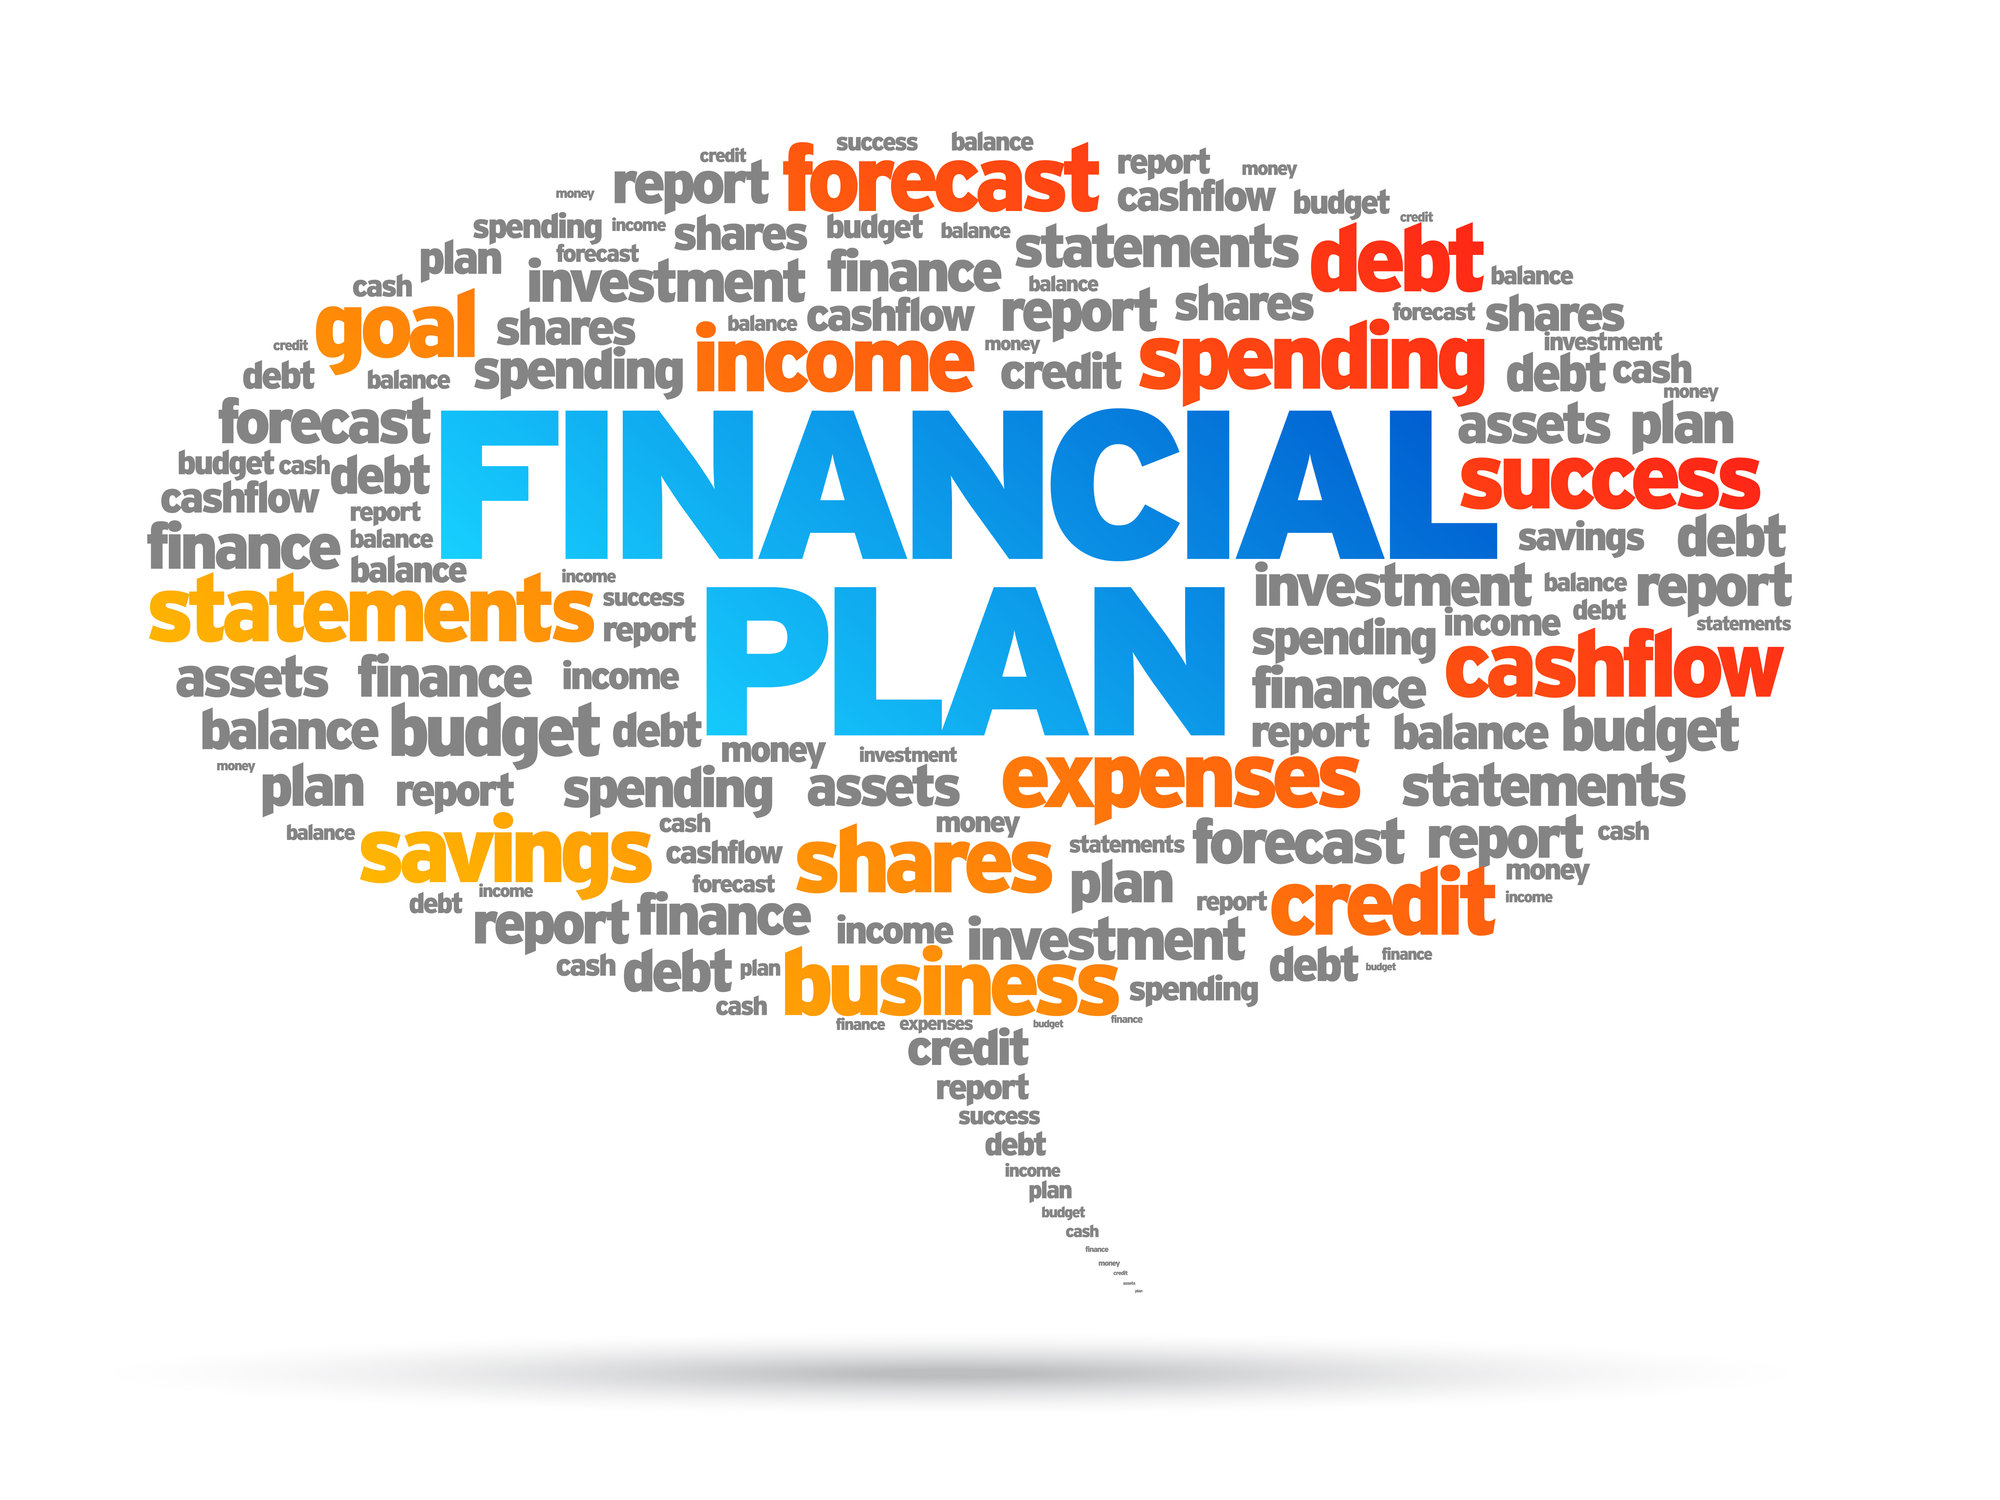 business financial planning meaning